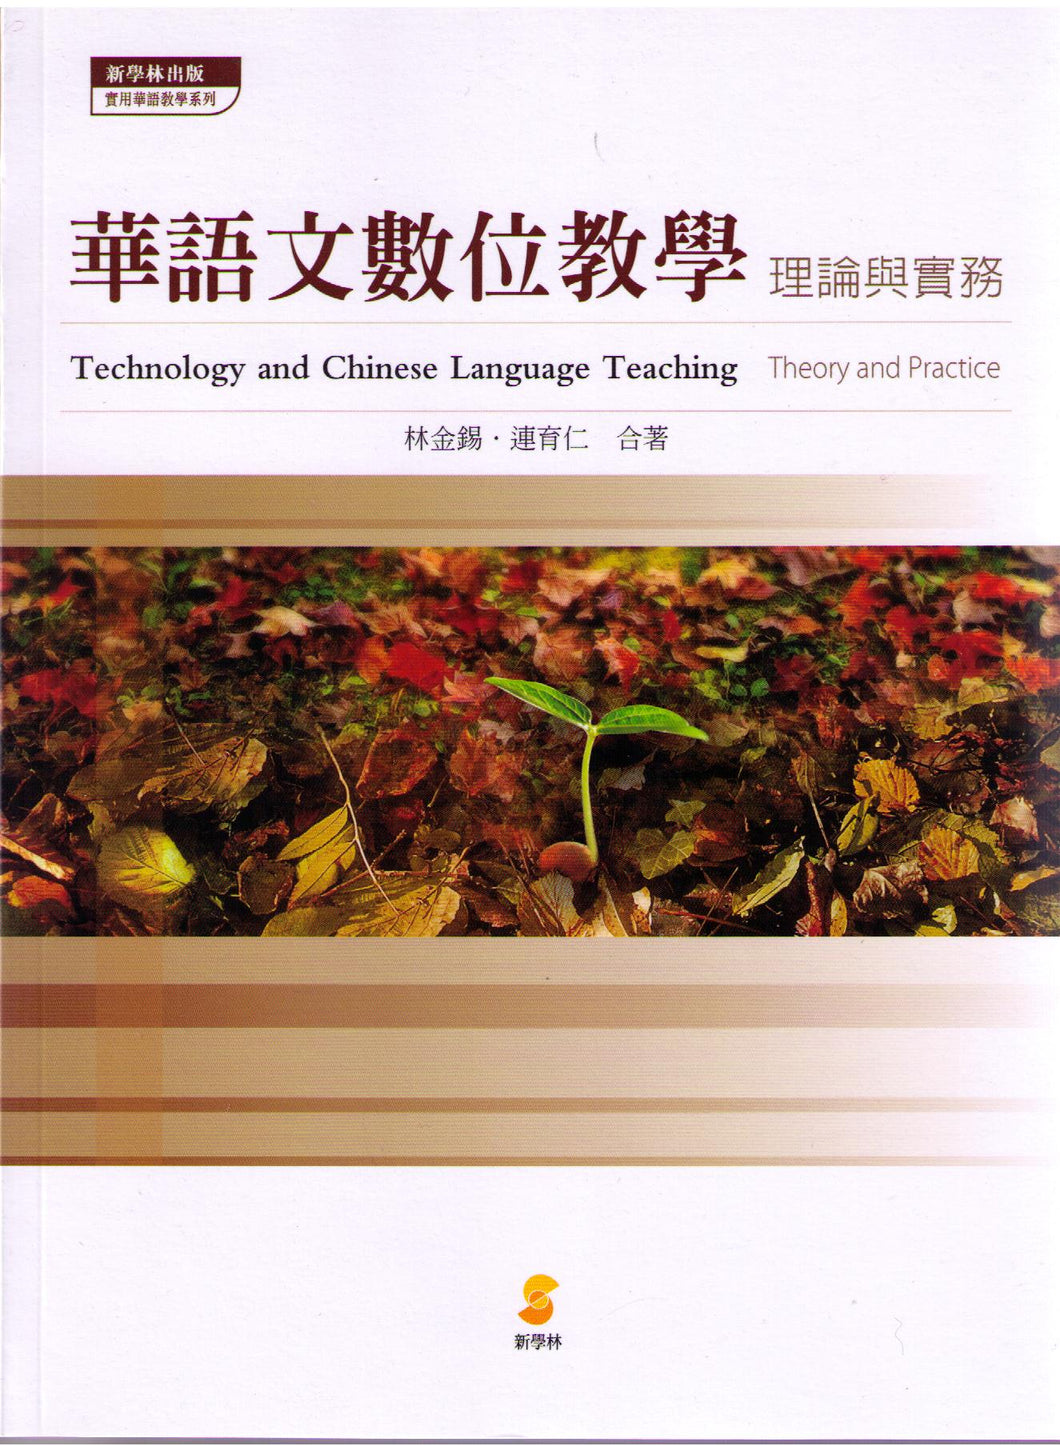 Technology and Chinese Language Teaching-Theory and Practice華語數位教學